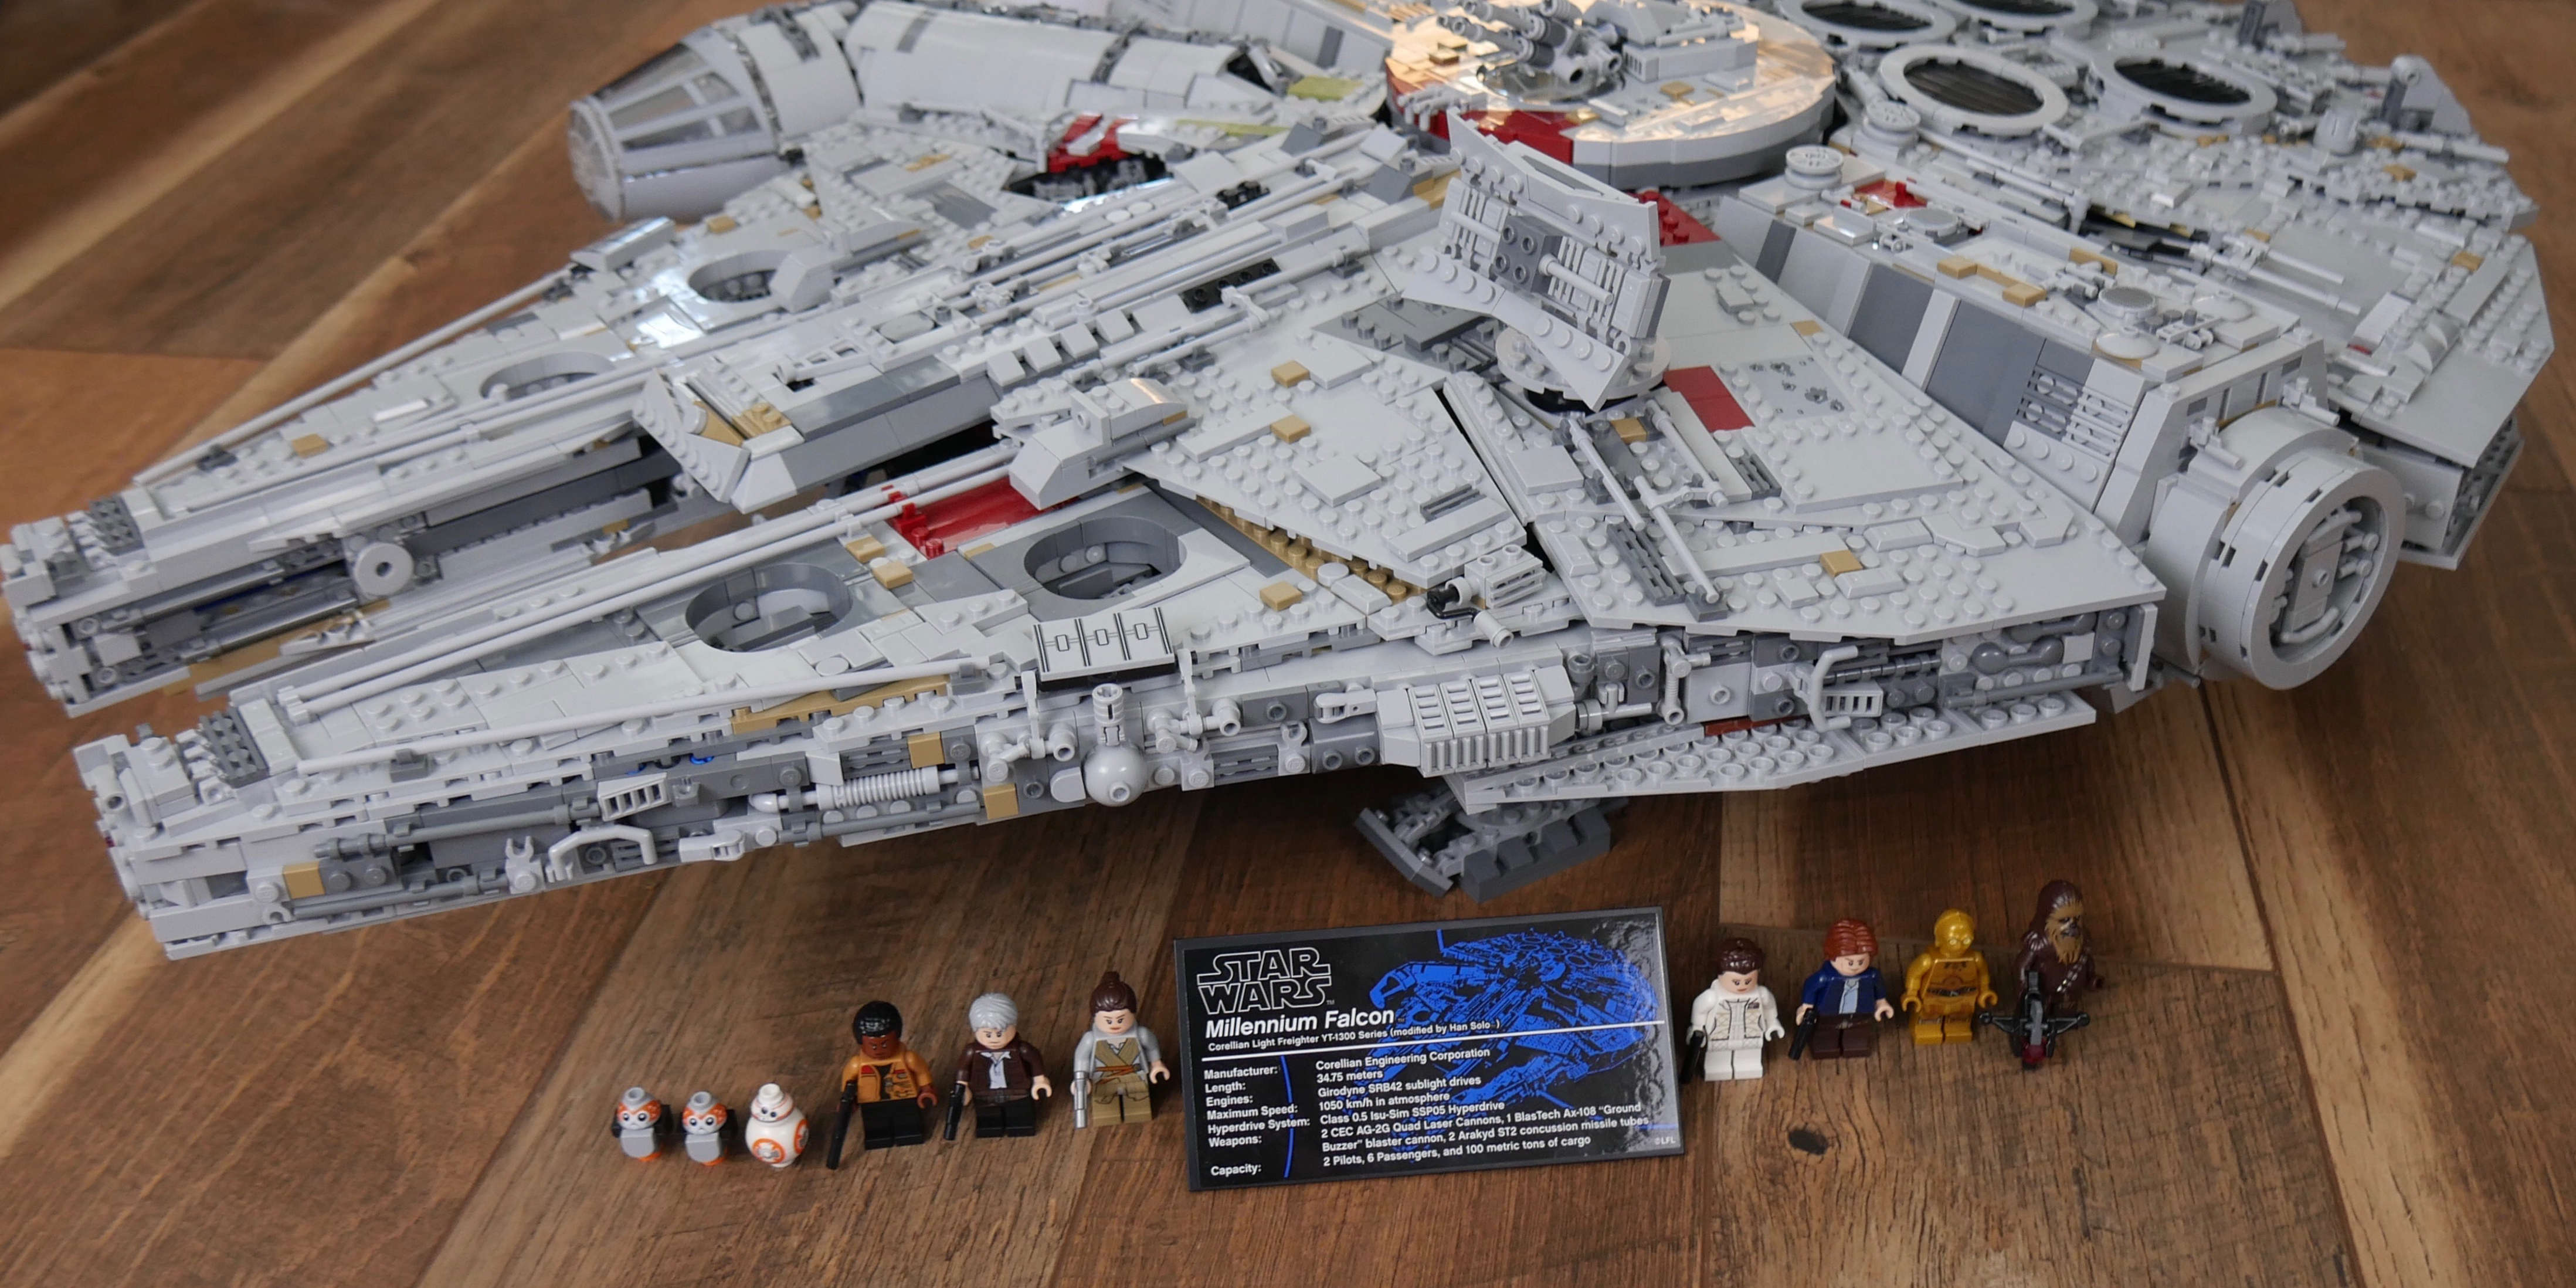 LEGO UCS Millennium Falcon hands-on look 9to5Toys